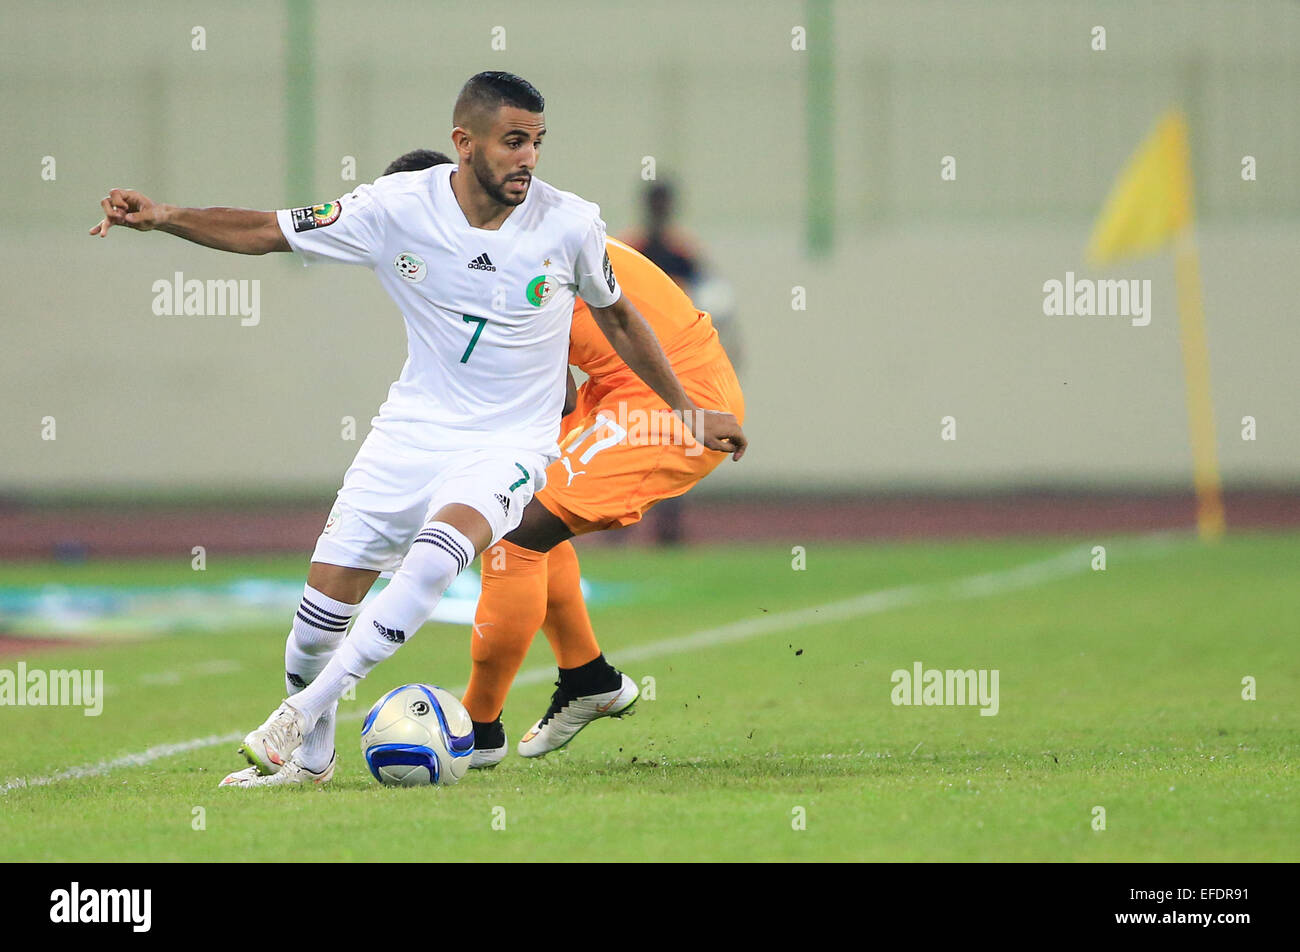 Malabo, Equatorial Guinea. 1st Feb, 2015. Riyad Karim Mahrez of Algeria breaks through during a quarterfinal match of Africa Cup of Nations against Cote d'Ivoire in Malabo, Equatorial Guinea, Feb. 1, 2015. Cote d'Ivoire won 3-1. Credit:  Meng Chenguang/Xinhua/Alamy Live News Stock Photo